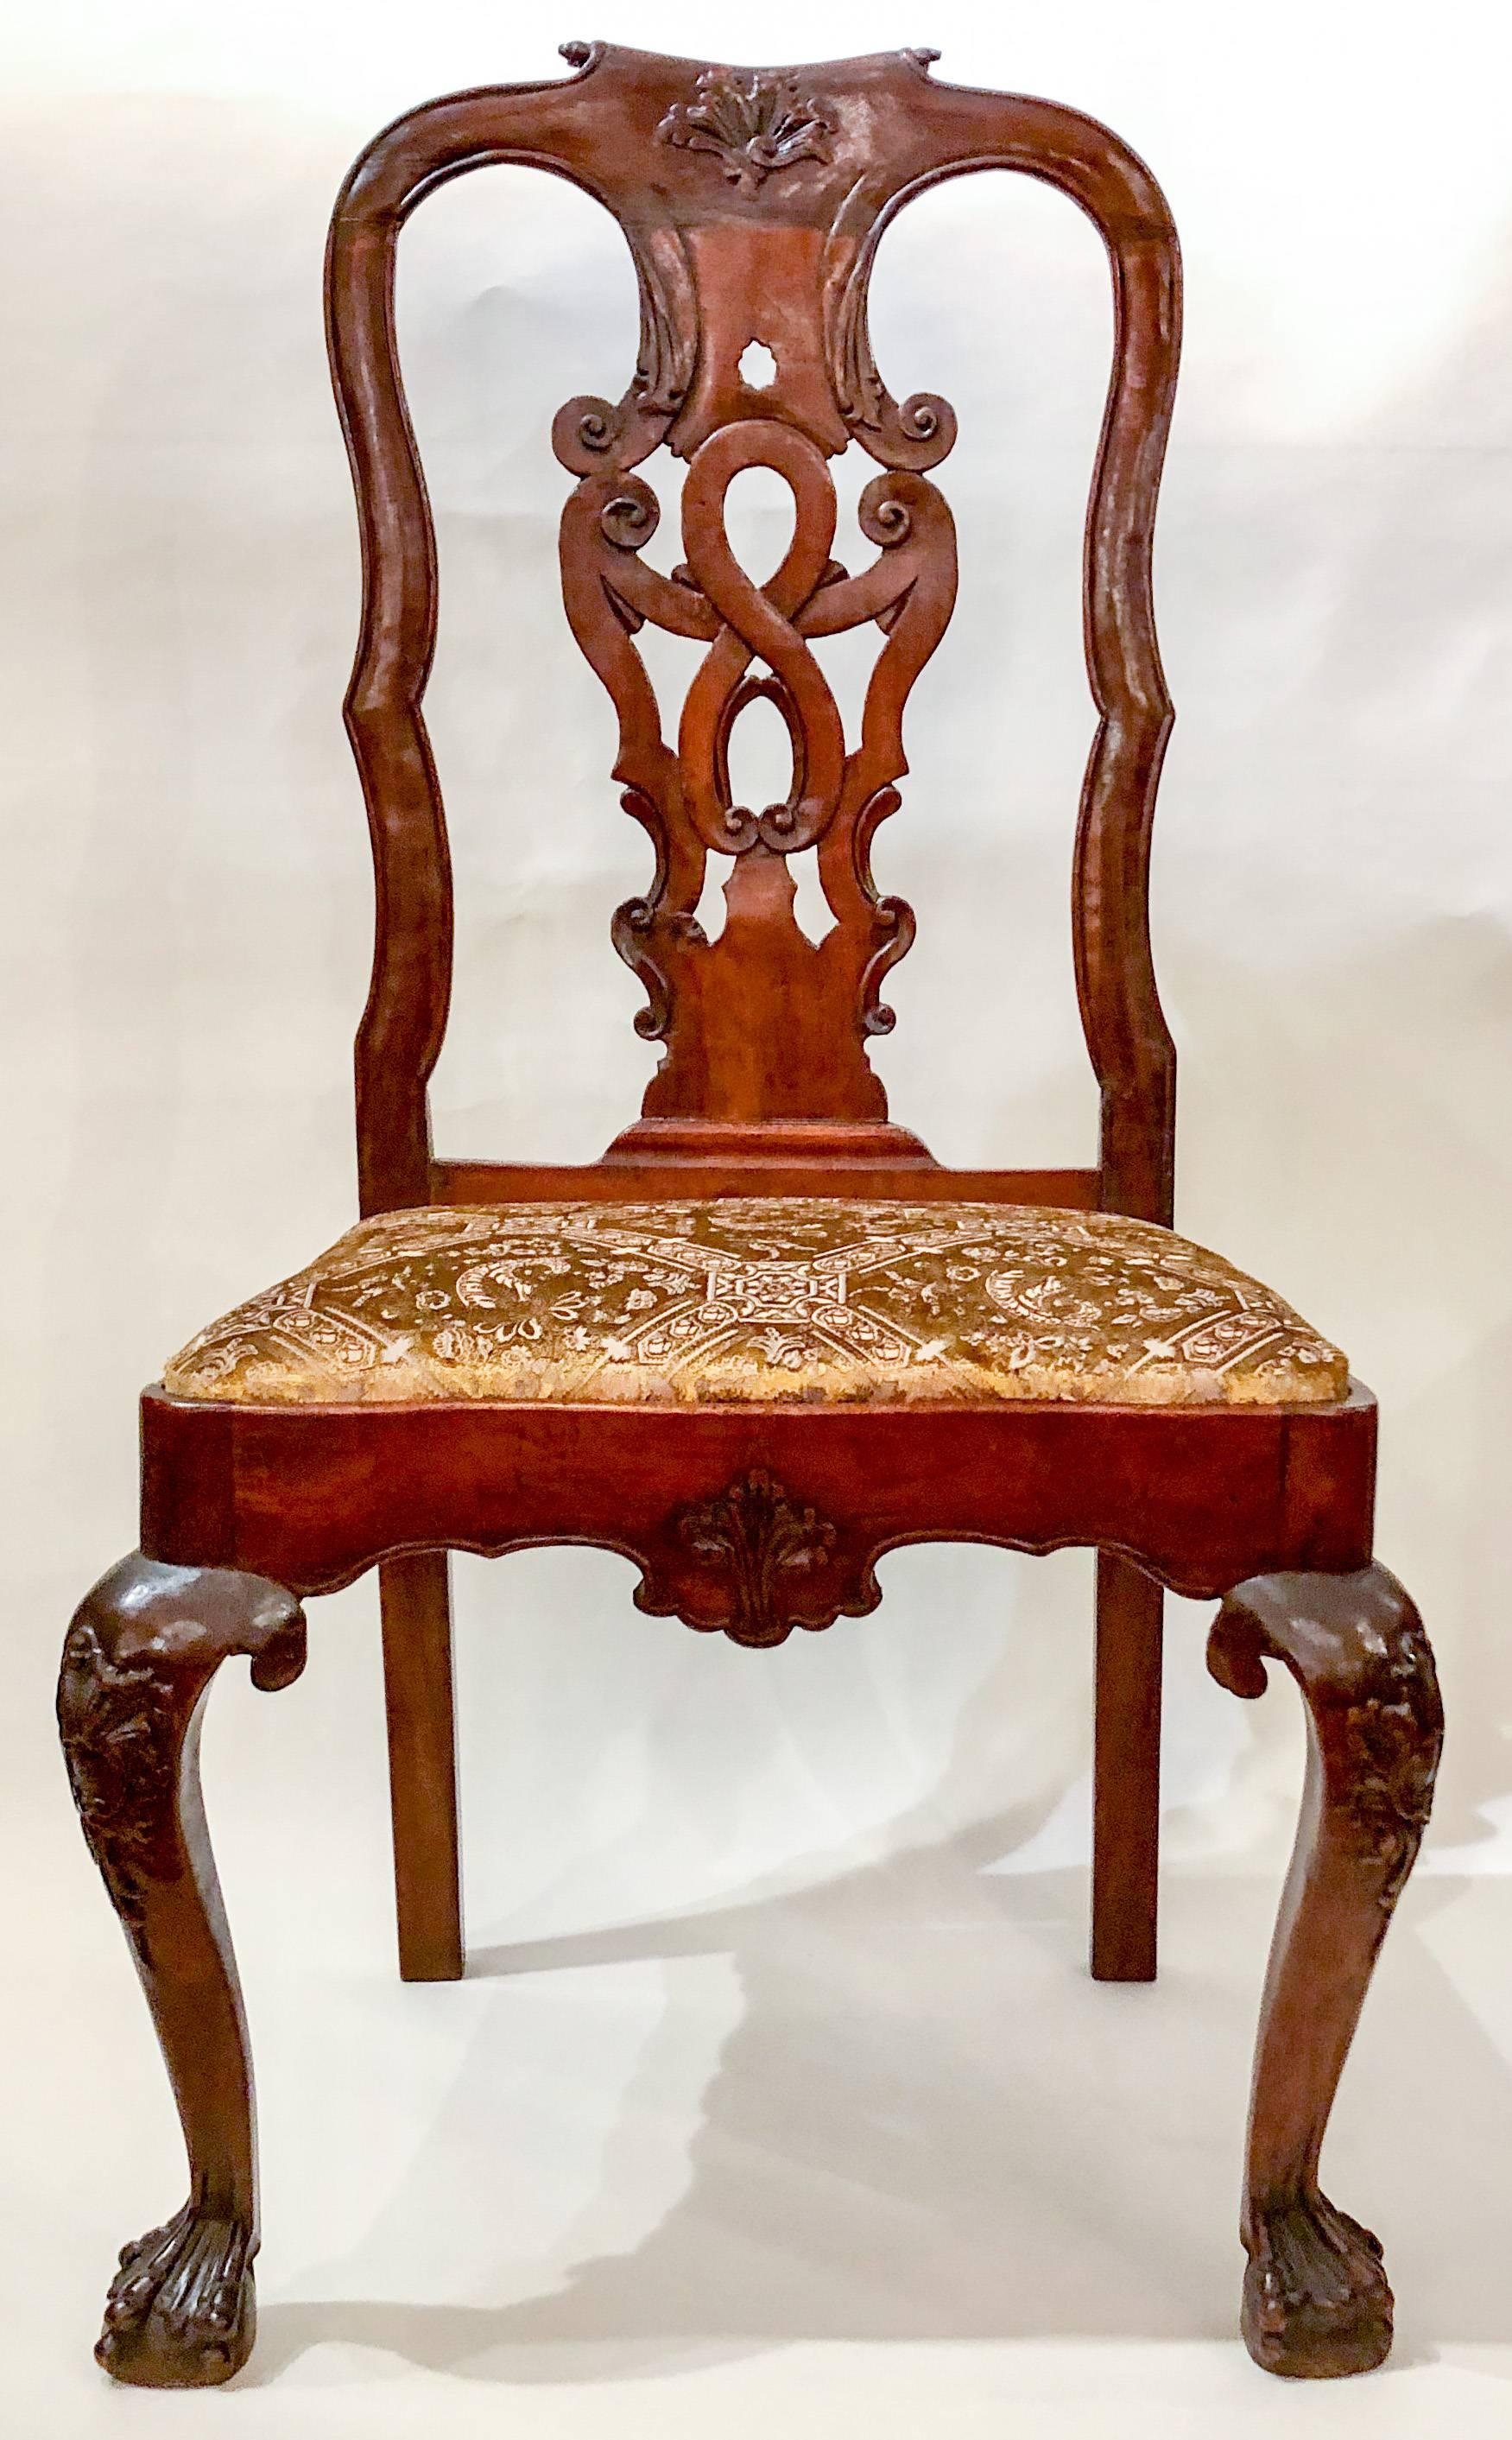 Pair of antique 18th century Queen Anne mahogany side chairs that are sure to please and are nicely upholstered.
 